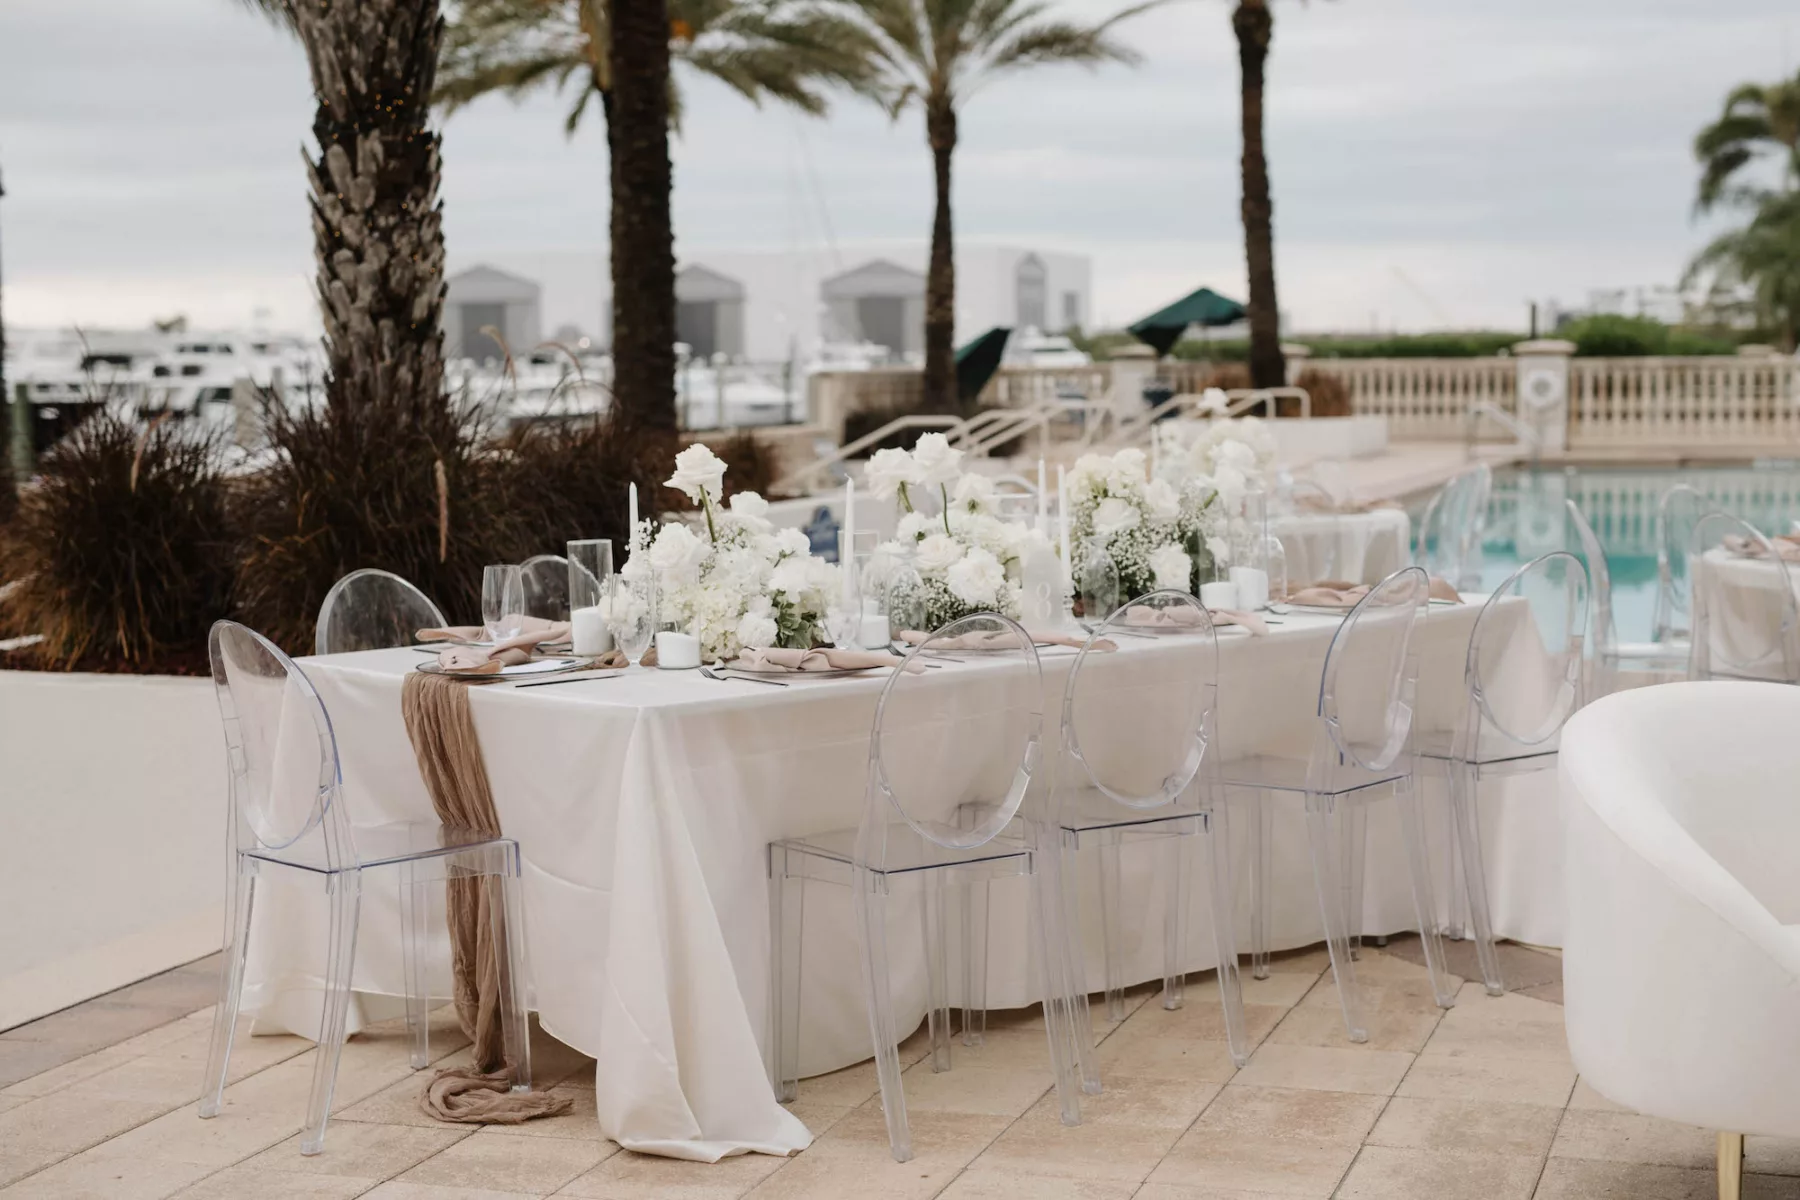 Modern Oceanview Poolside Monochromatic Spring Wedding Reception Tablescape Ideas | Acrylic Ghost Chairs | White Roses and Baby's Breath Centerpiece Inspiration | Tampa Bay Kate Ryan Event Rentals | Venue Westshore Yacht Club